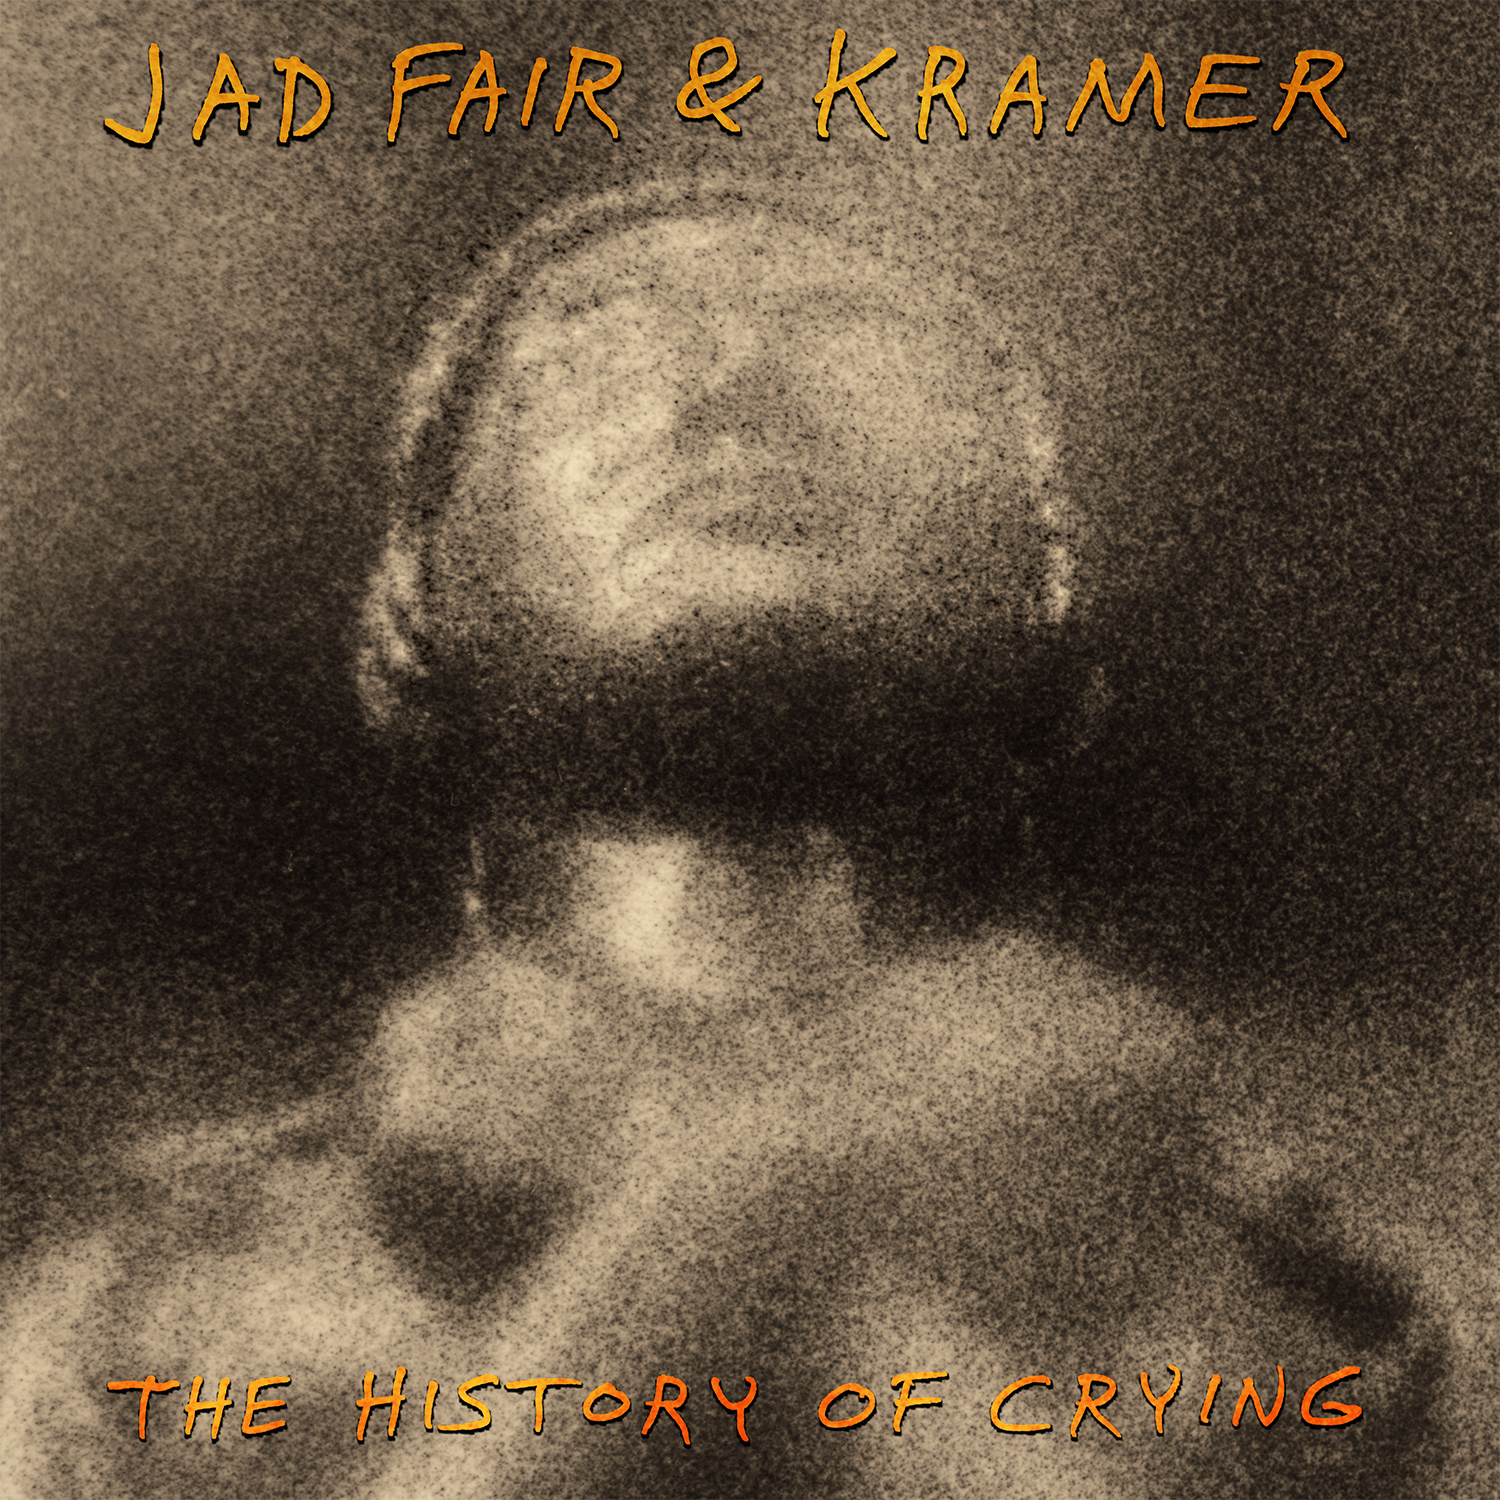 A Sadsack Buoyancy Meeting a Subtle Wizardry – Jad Fair & Kramer’s “The History of Crying”